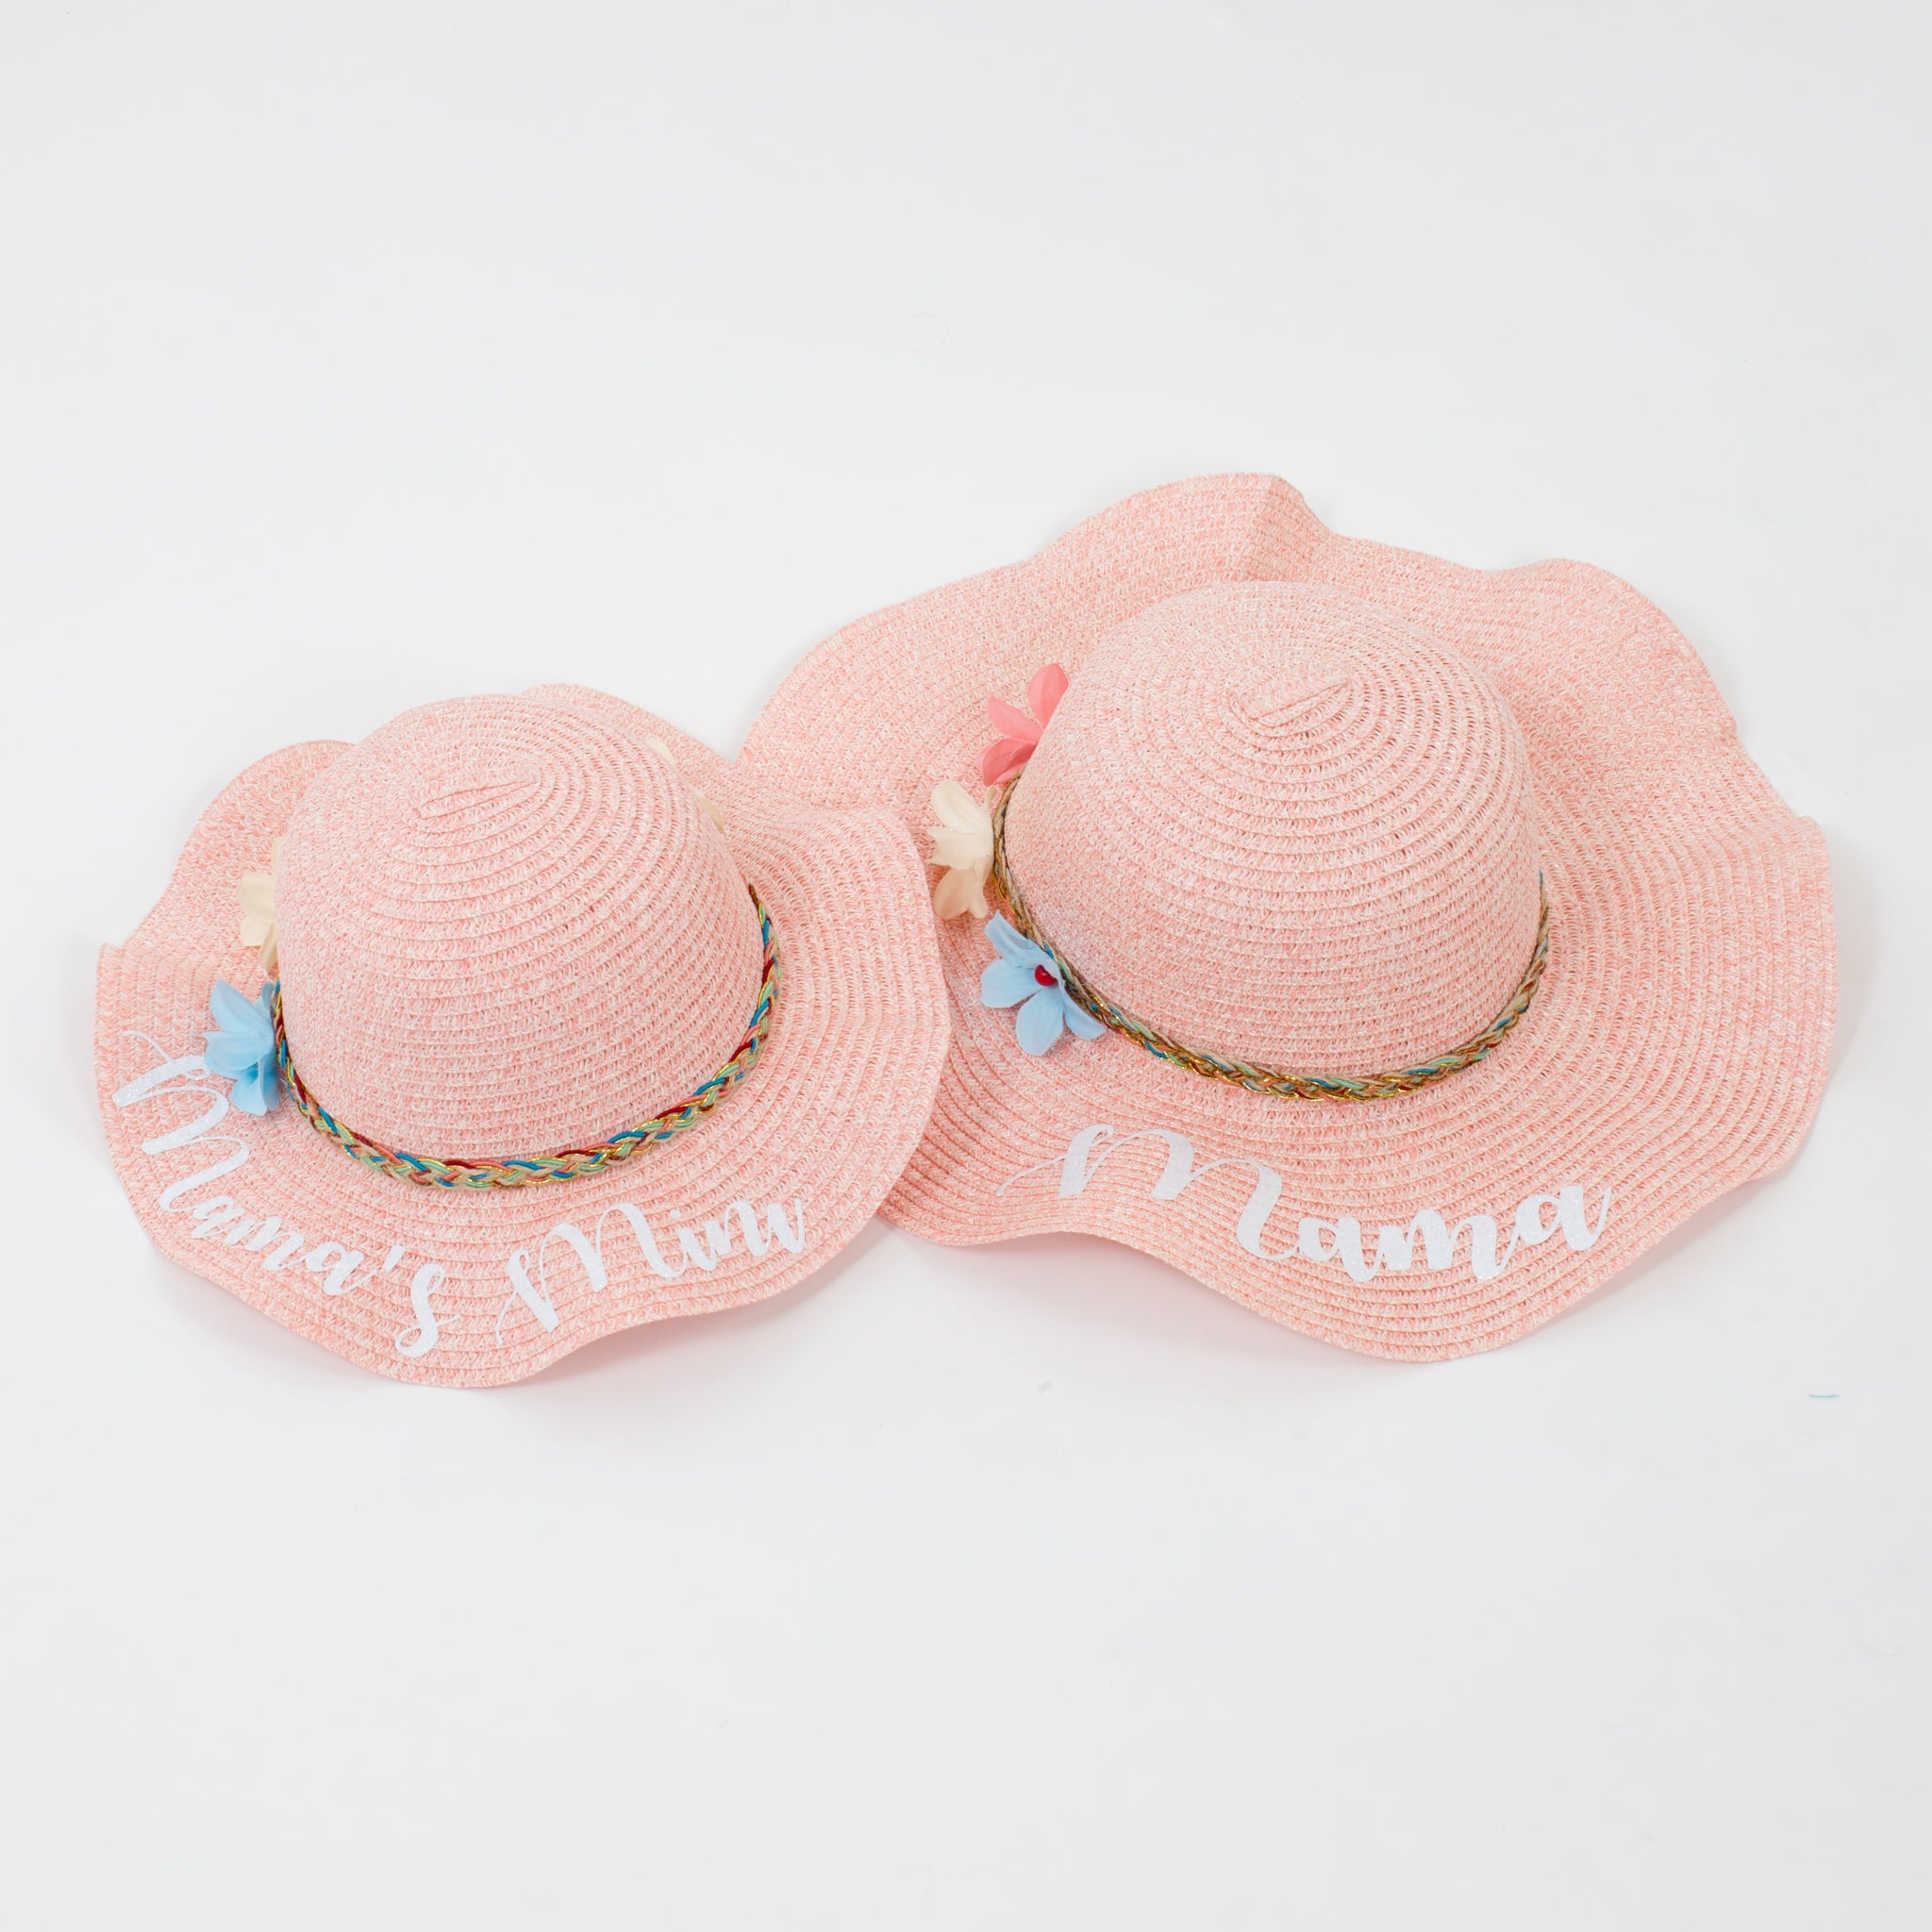 Mama and Mini Hats For Women, Cute Mother Daughter Hats, Mom And Daughter  Matching Hats, Mommy and Me Hats, Set of 2 Matching Toddler And Mommy Hats